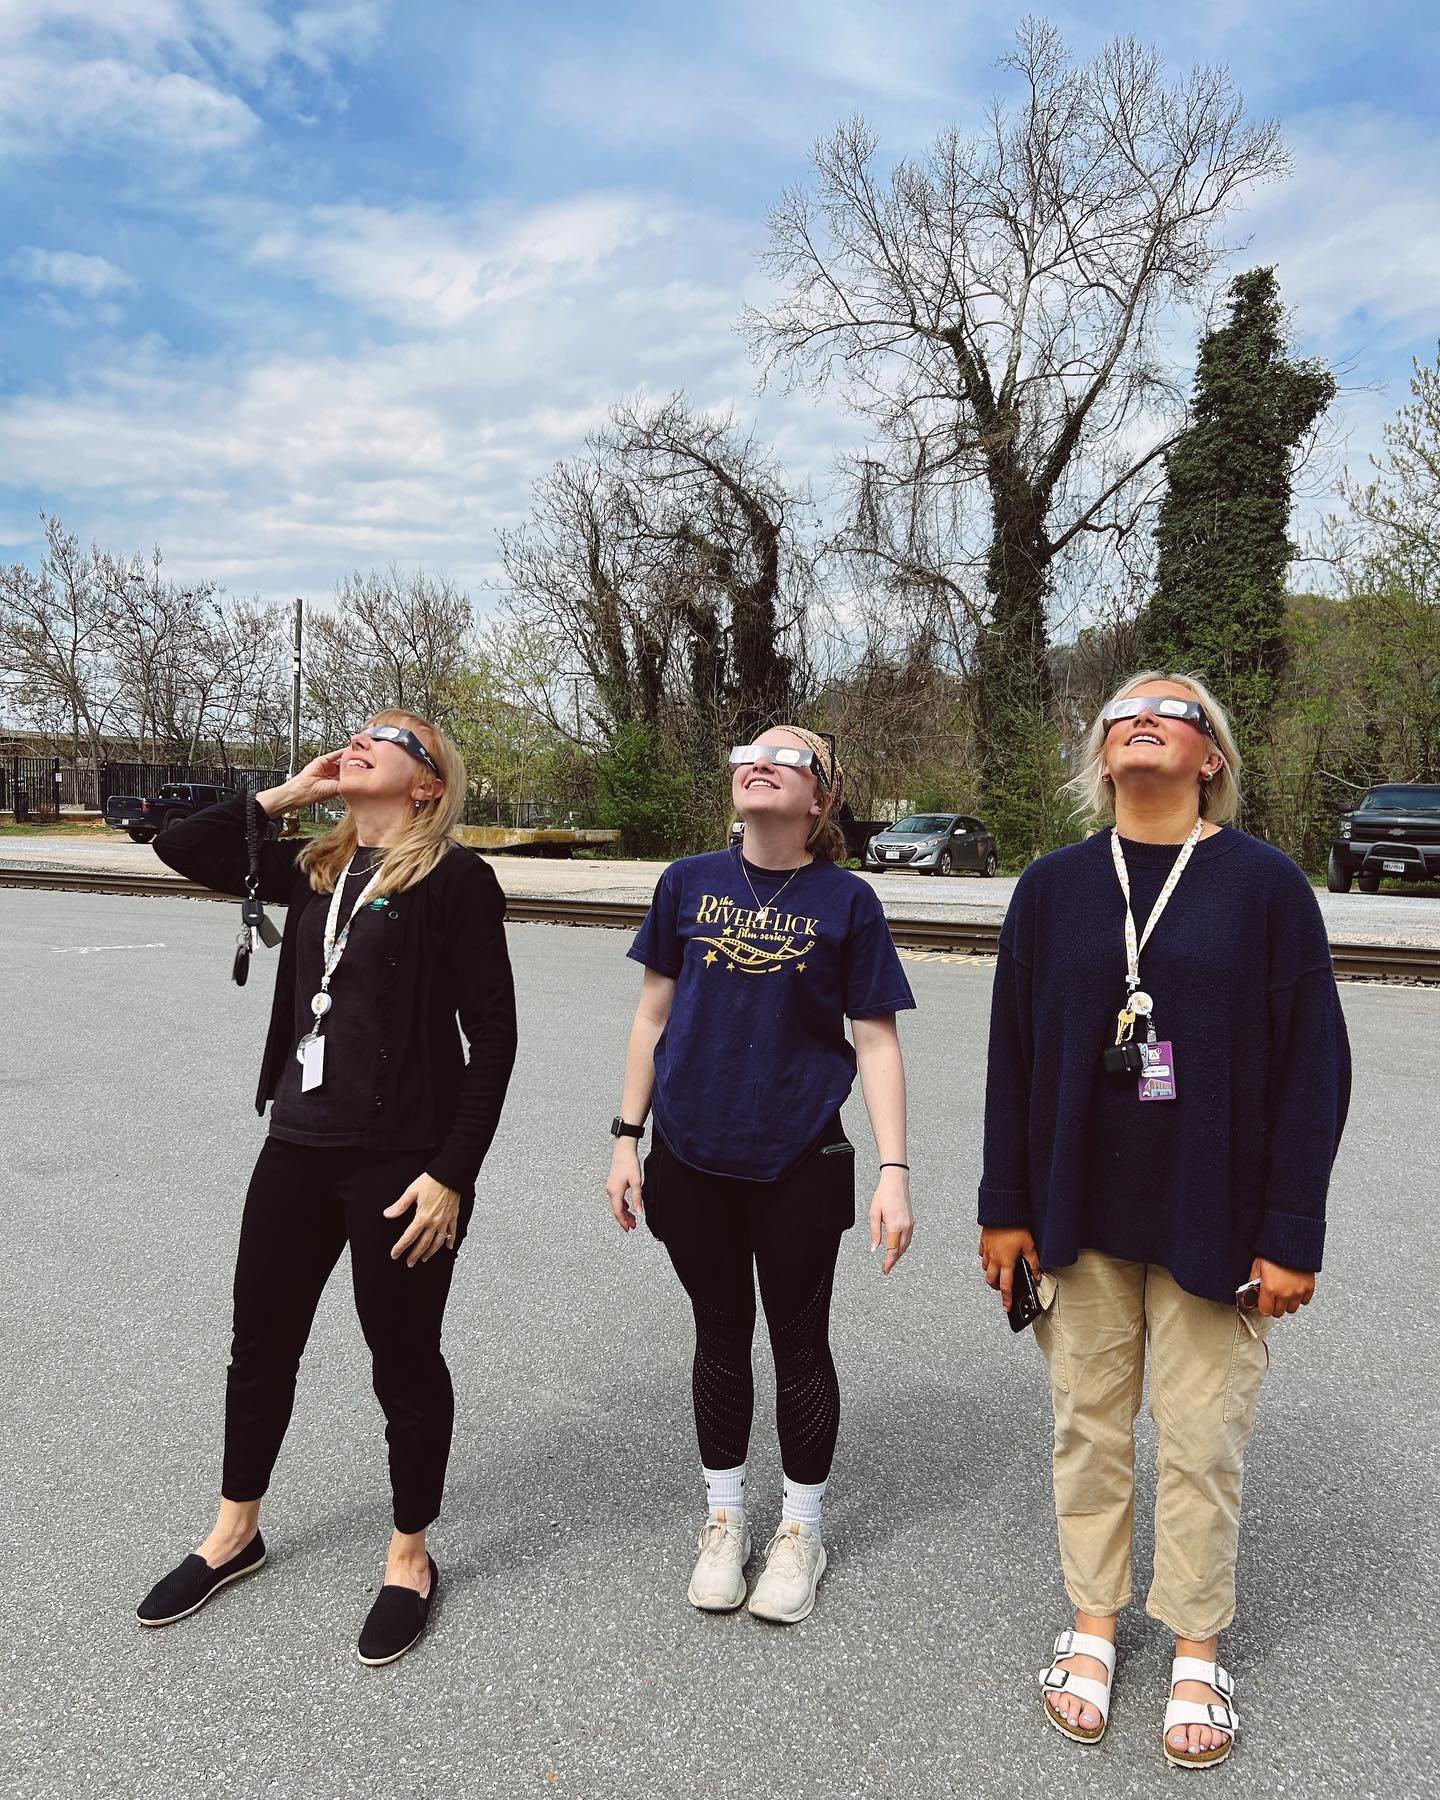 Our team had to take a quick break to catch the eclipse! Did you see it??